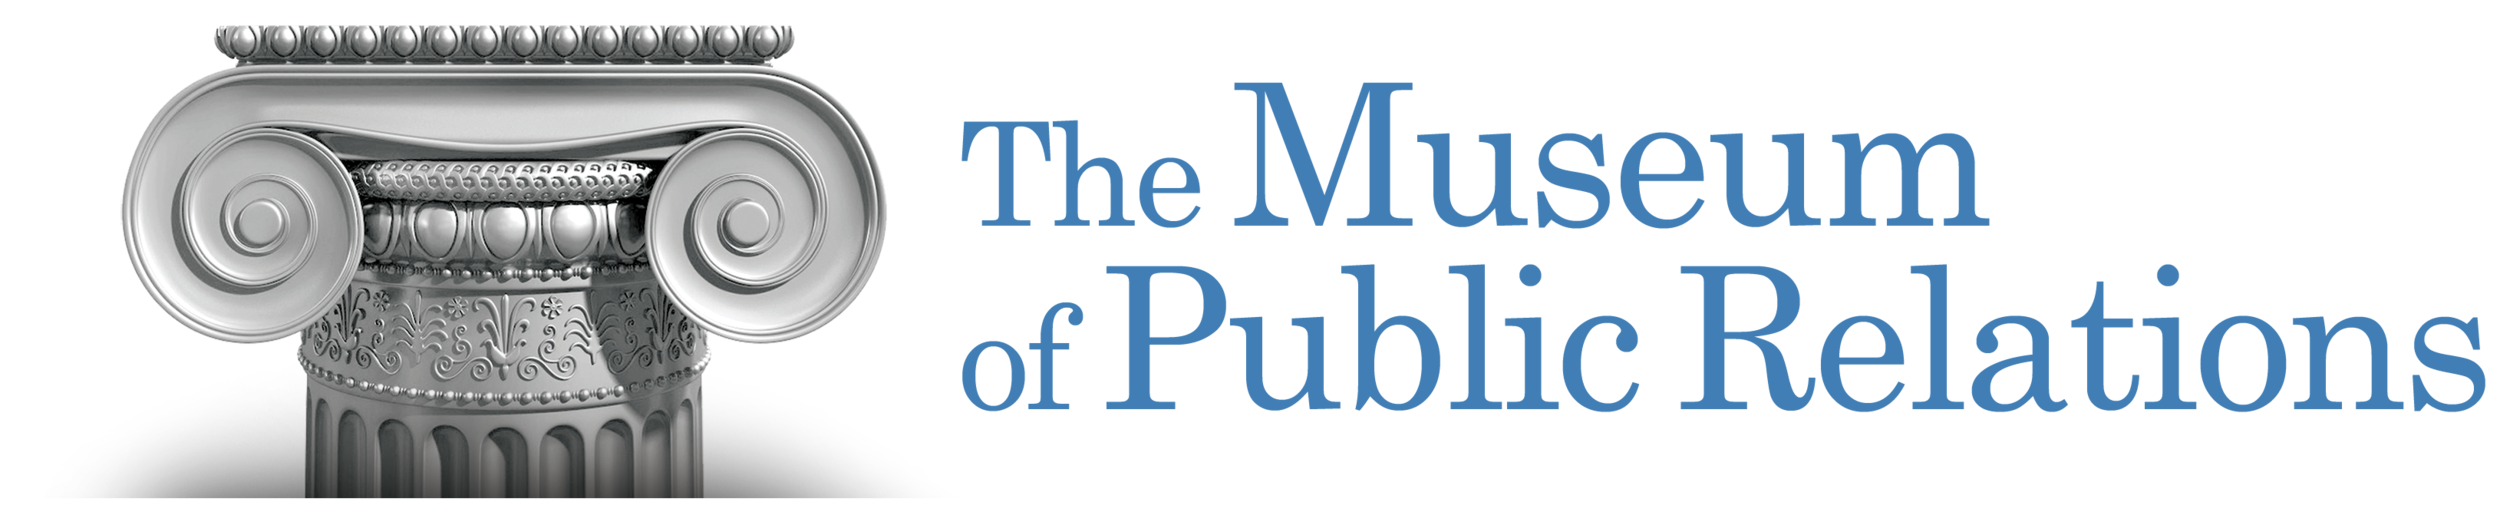 logo-PRMuseum-NO-library-side-by-side.png